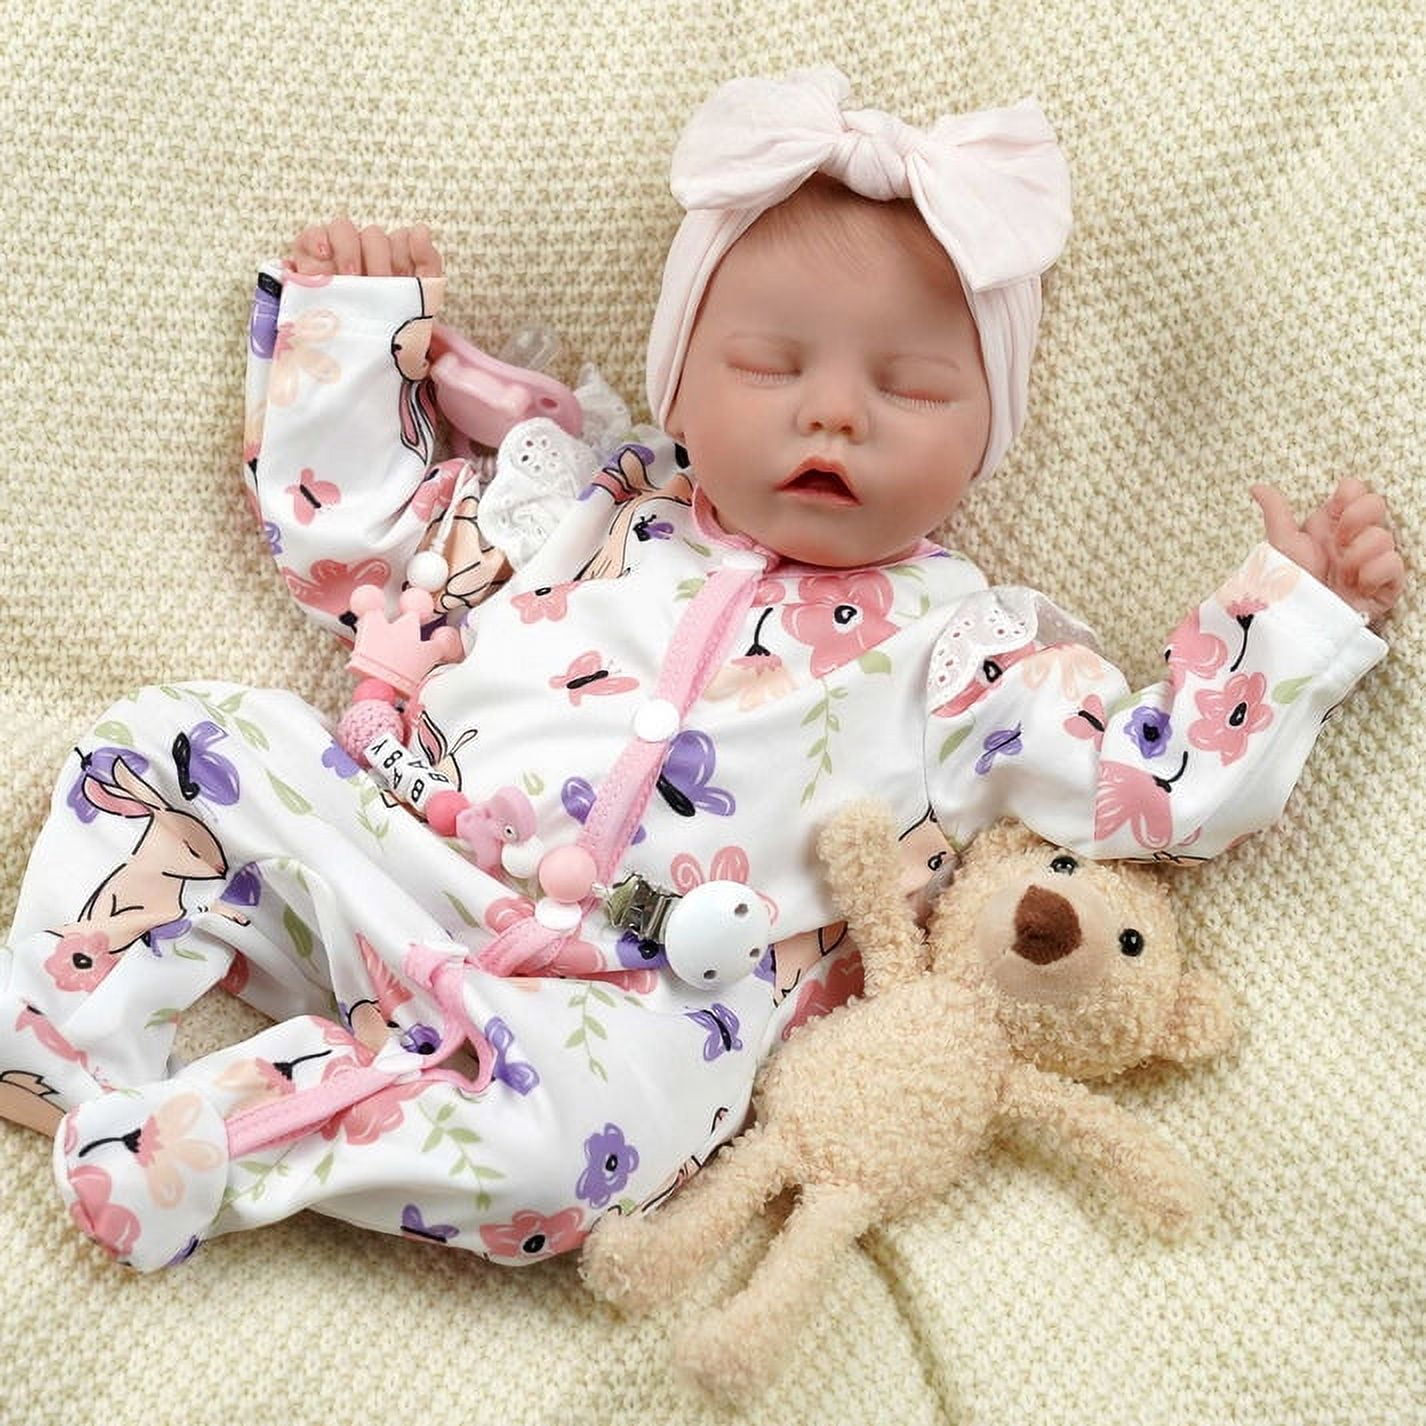  BABESIDE Lifelike Reborn Baby Dolls - 20-Inch Sweet Smile Real  Life Realistic-Newborn Full Body Vinyl Sleeping Baby Girl with Toy  Accessories Gift Set for Kids Age 3+ : Toys & Games